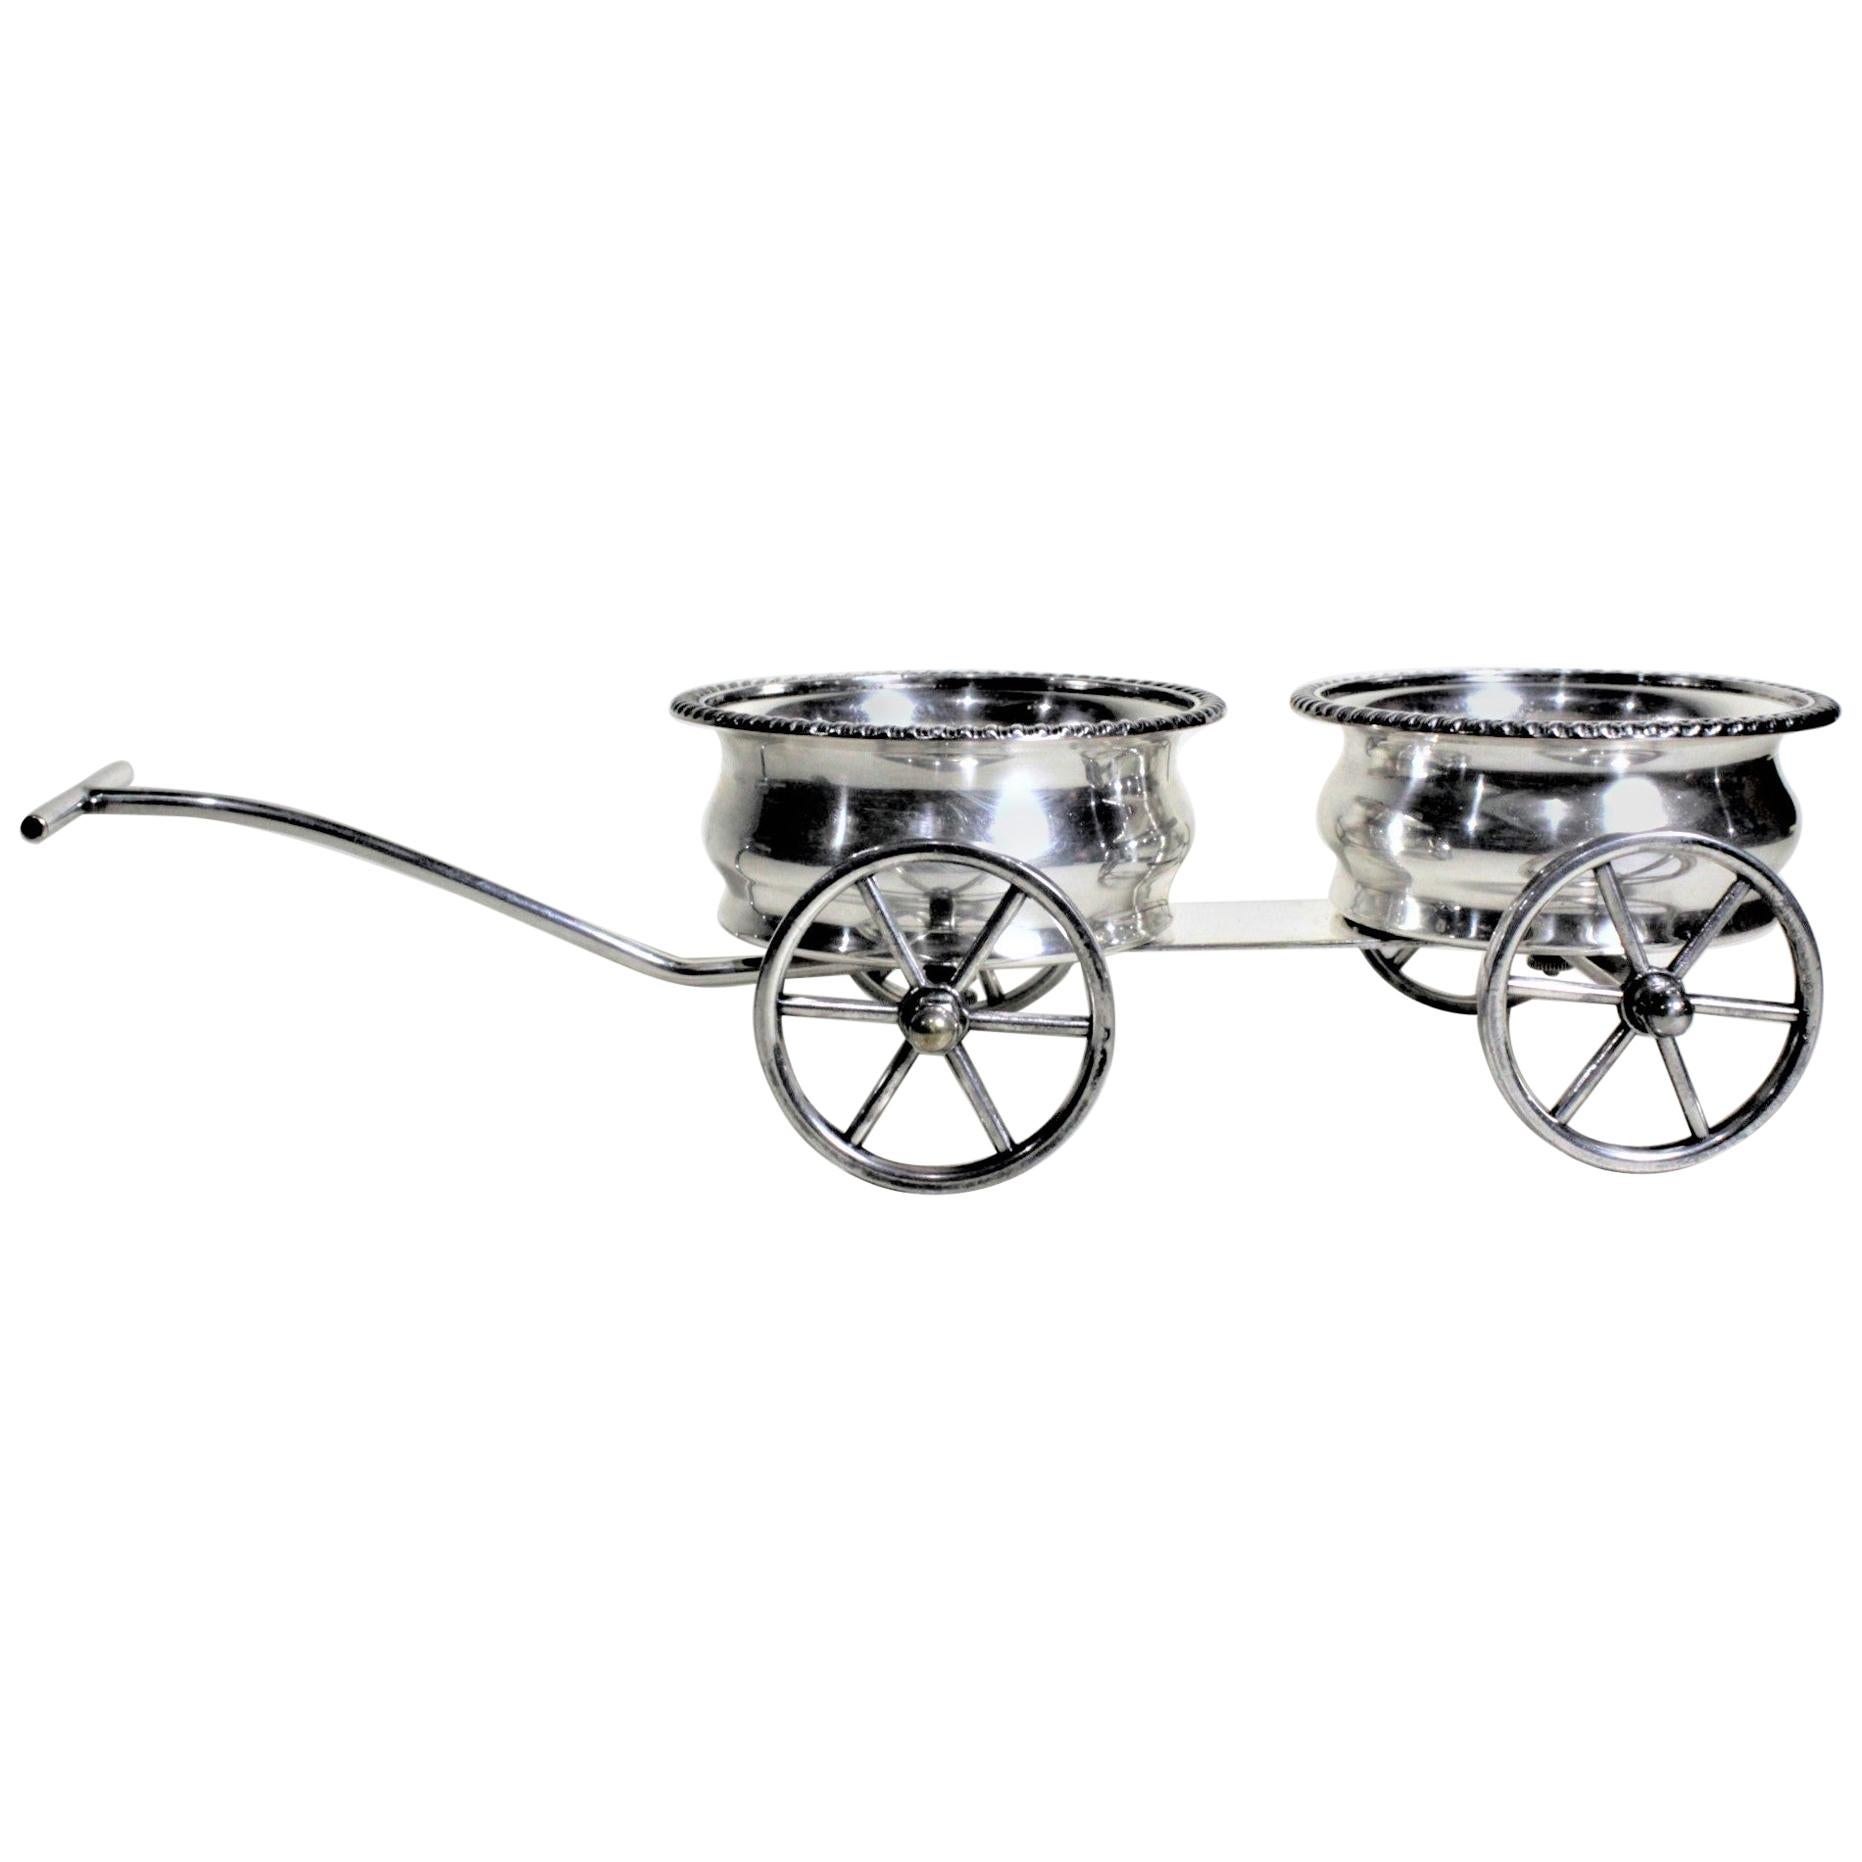 Mid-Century Silver Plated Figural Wine Bottle Wagon or Coaster Set